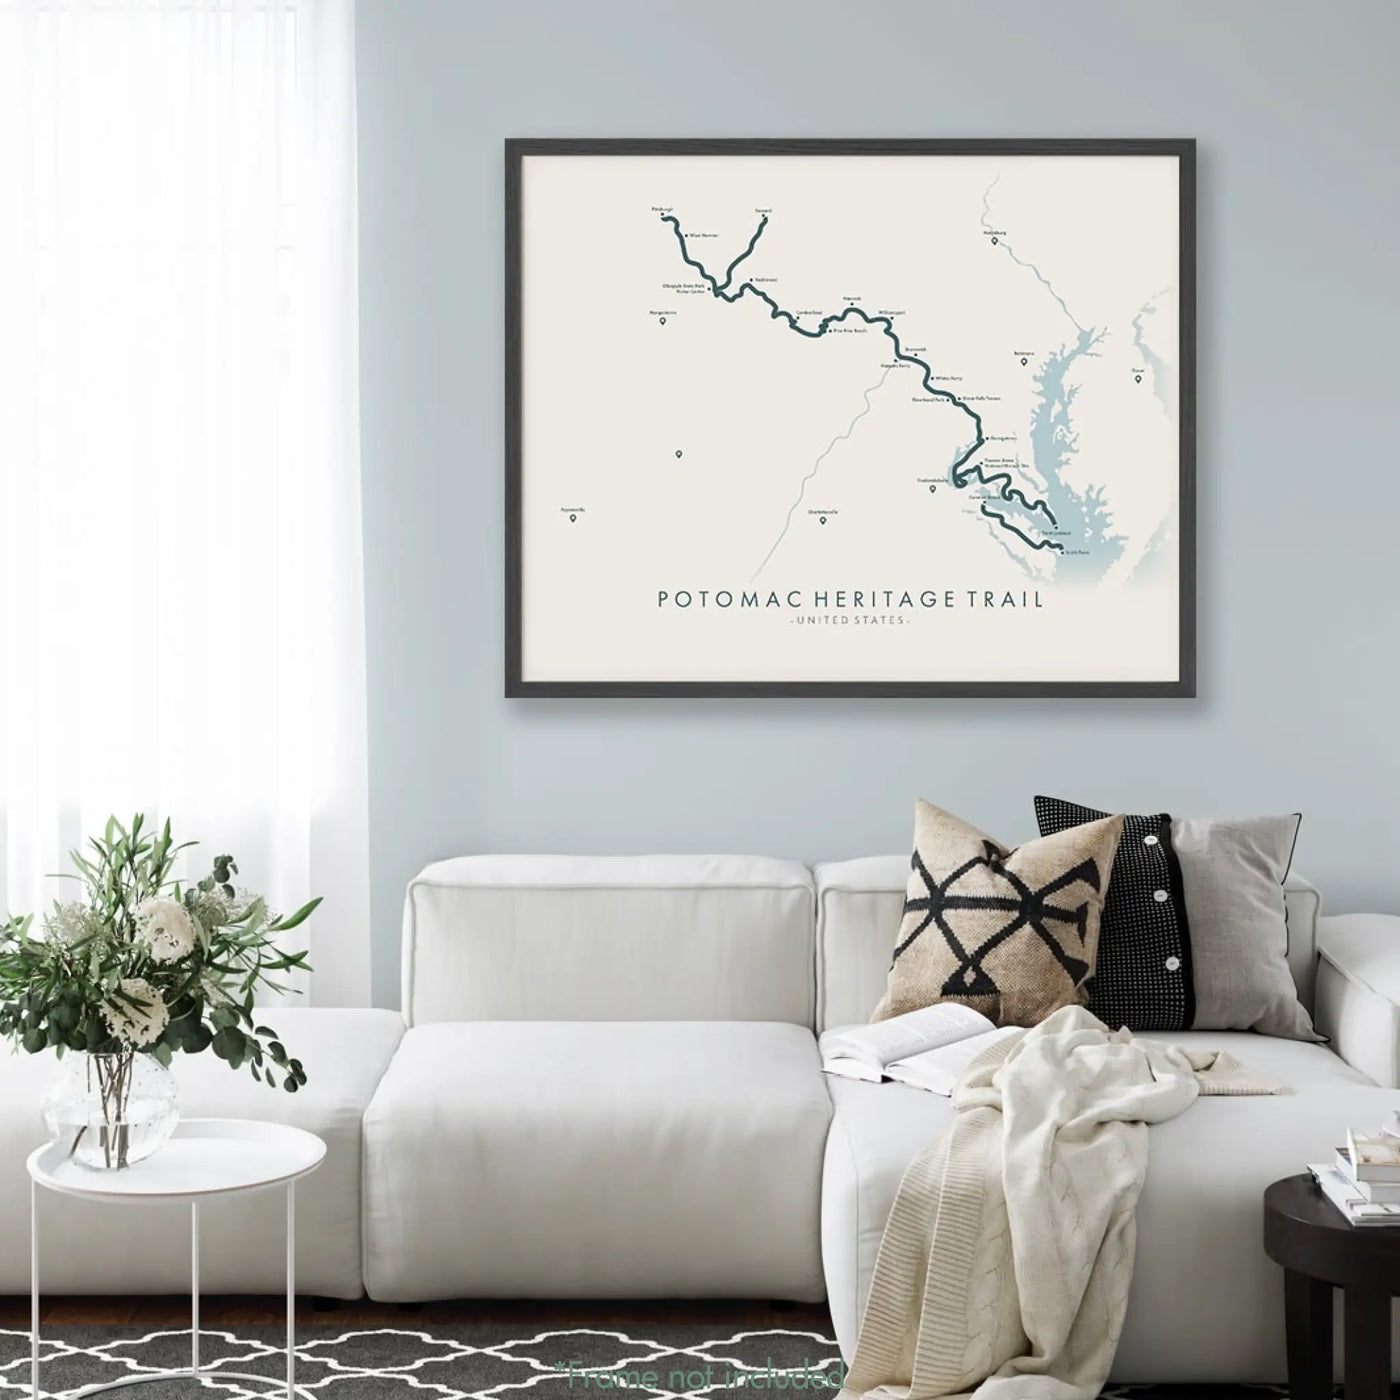 Trail Poster of Potomac Heritage Trail - Beige Mockup